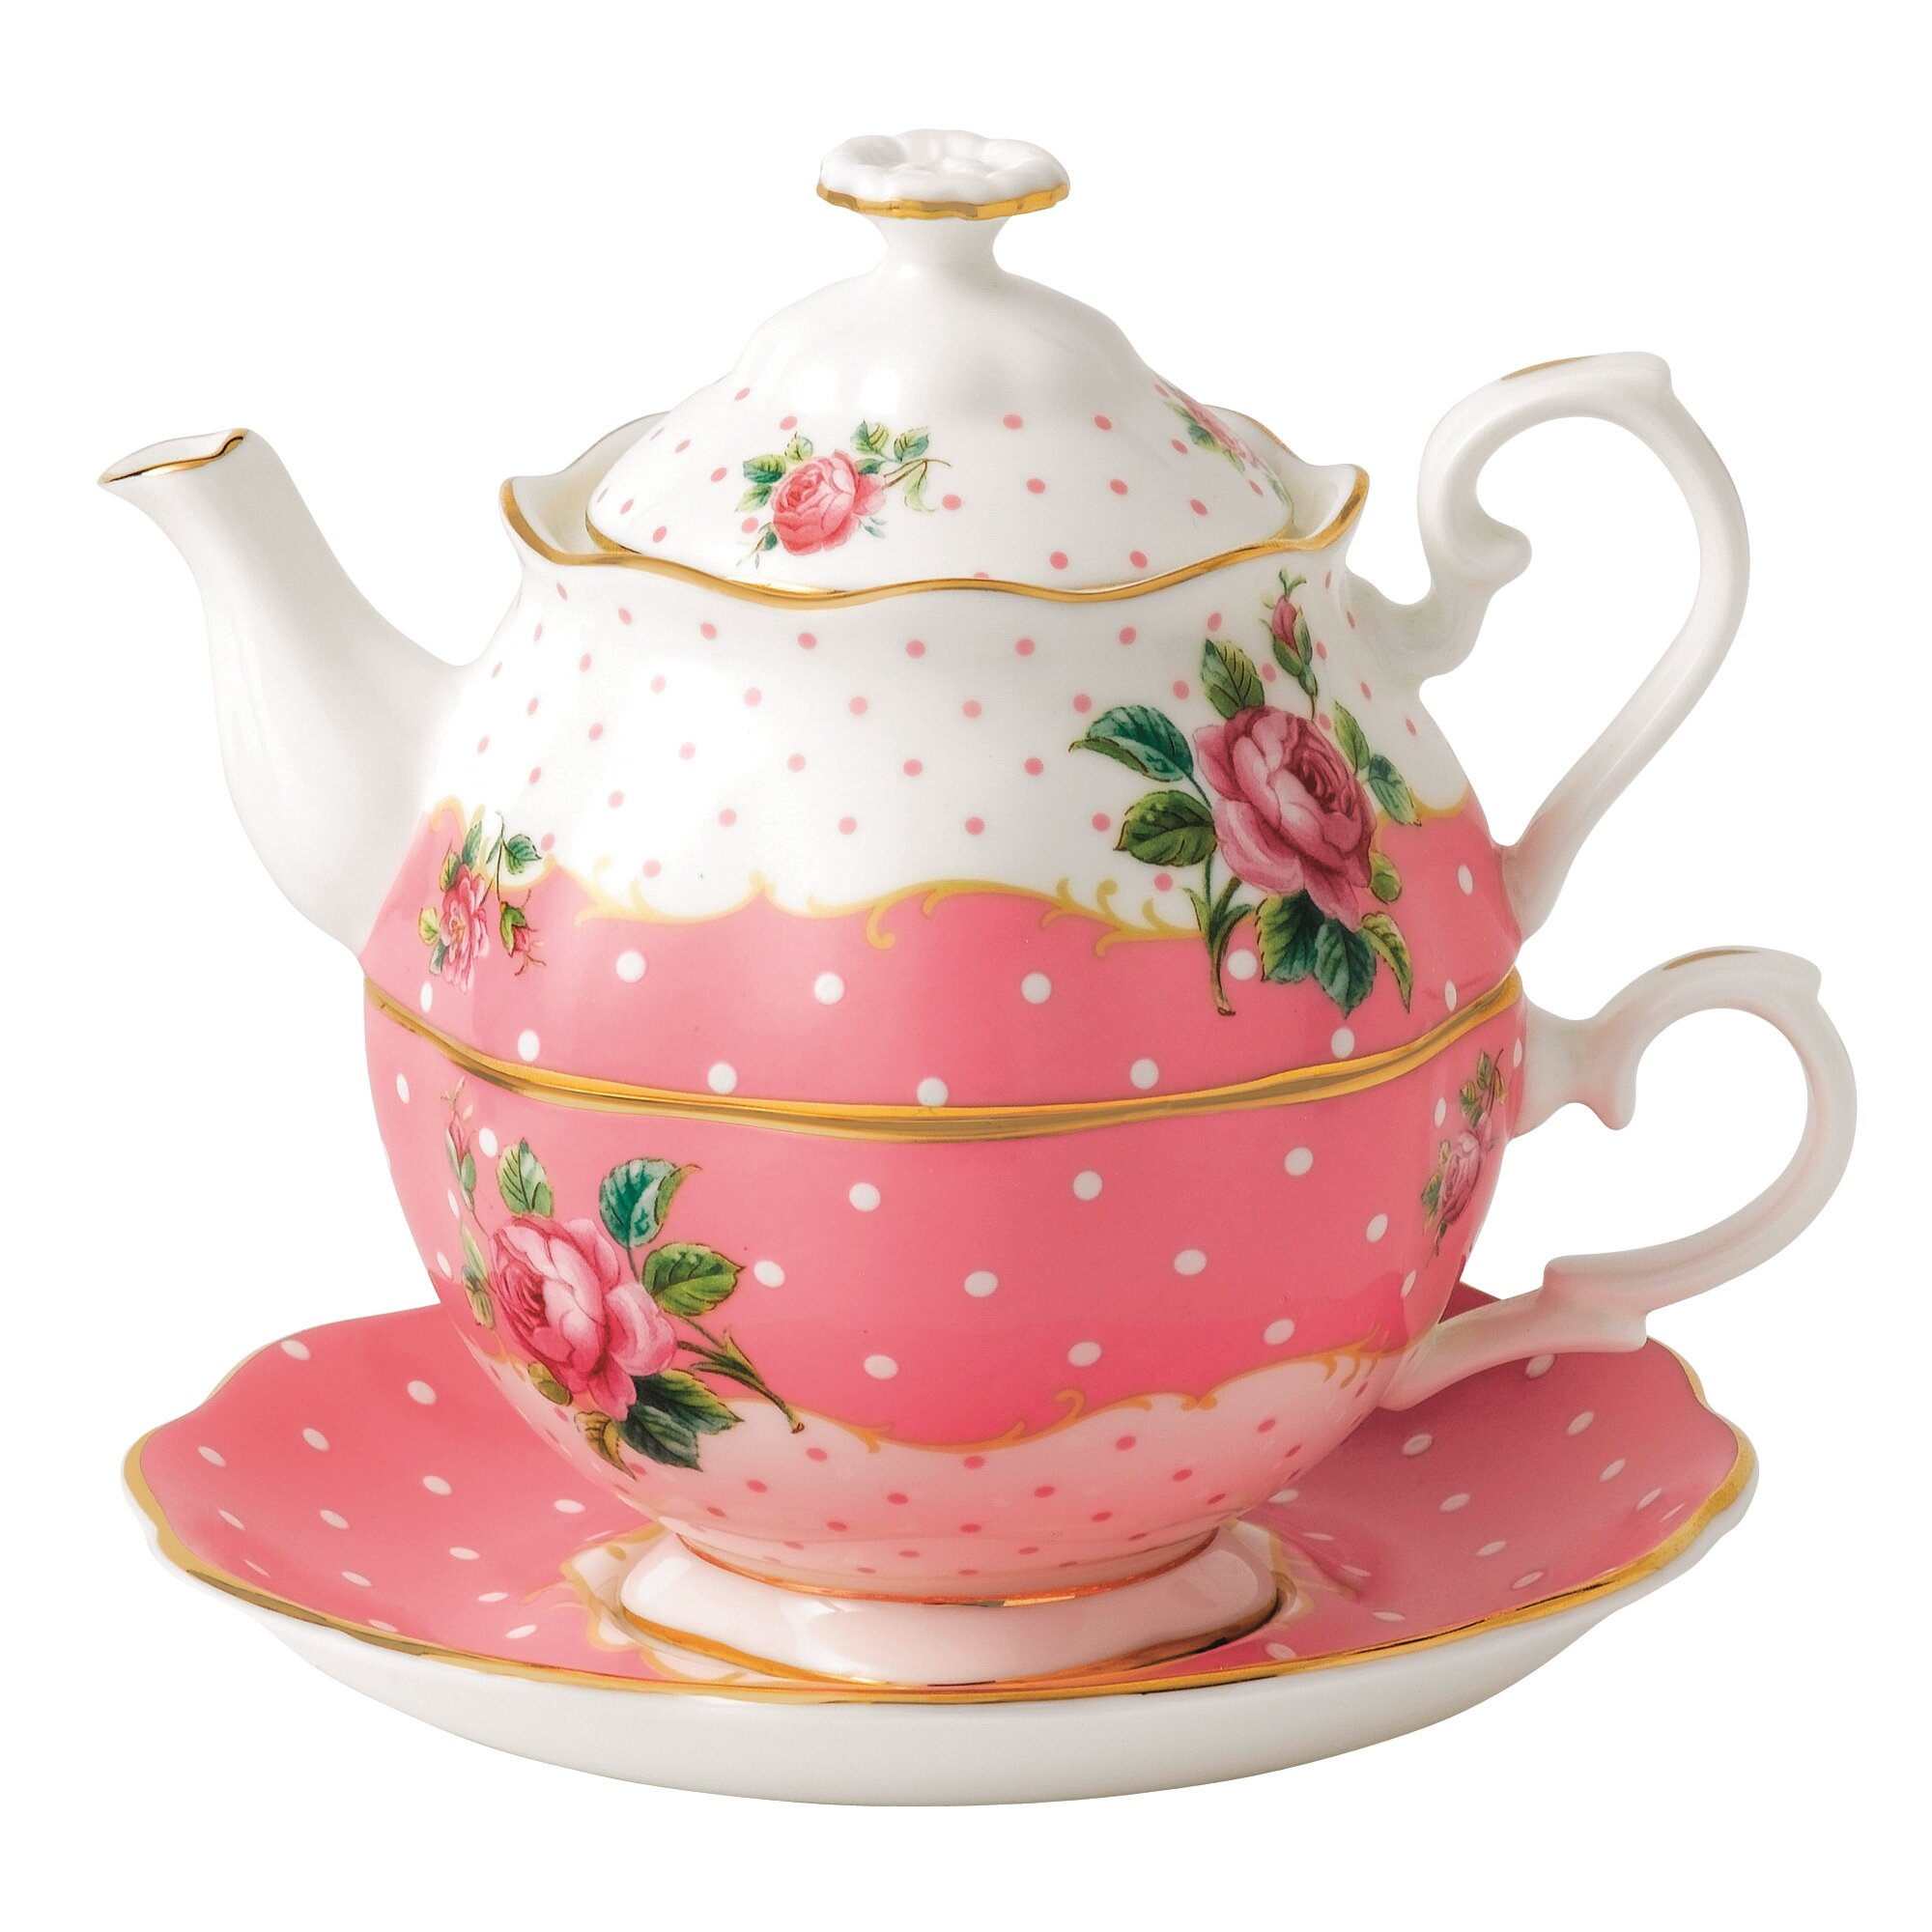 Royal Albert Vintage Tea for One Cup and Saucer Teapot Set & Reviews